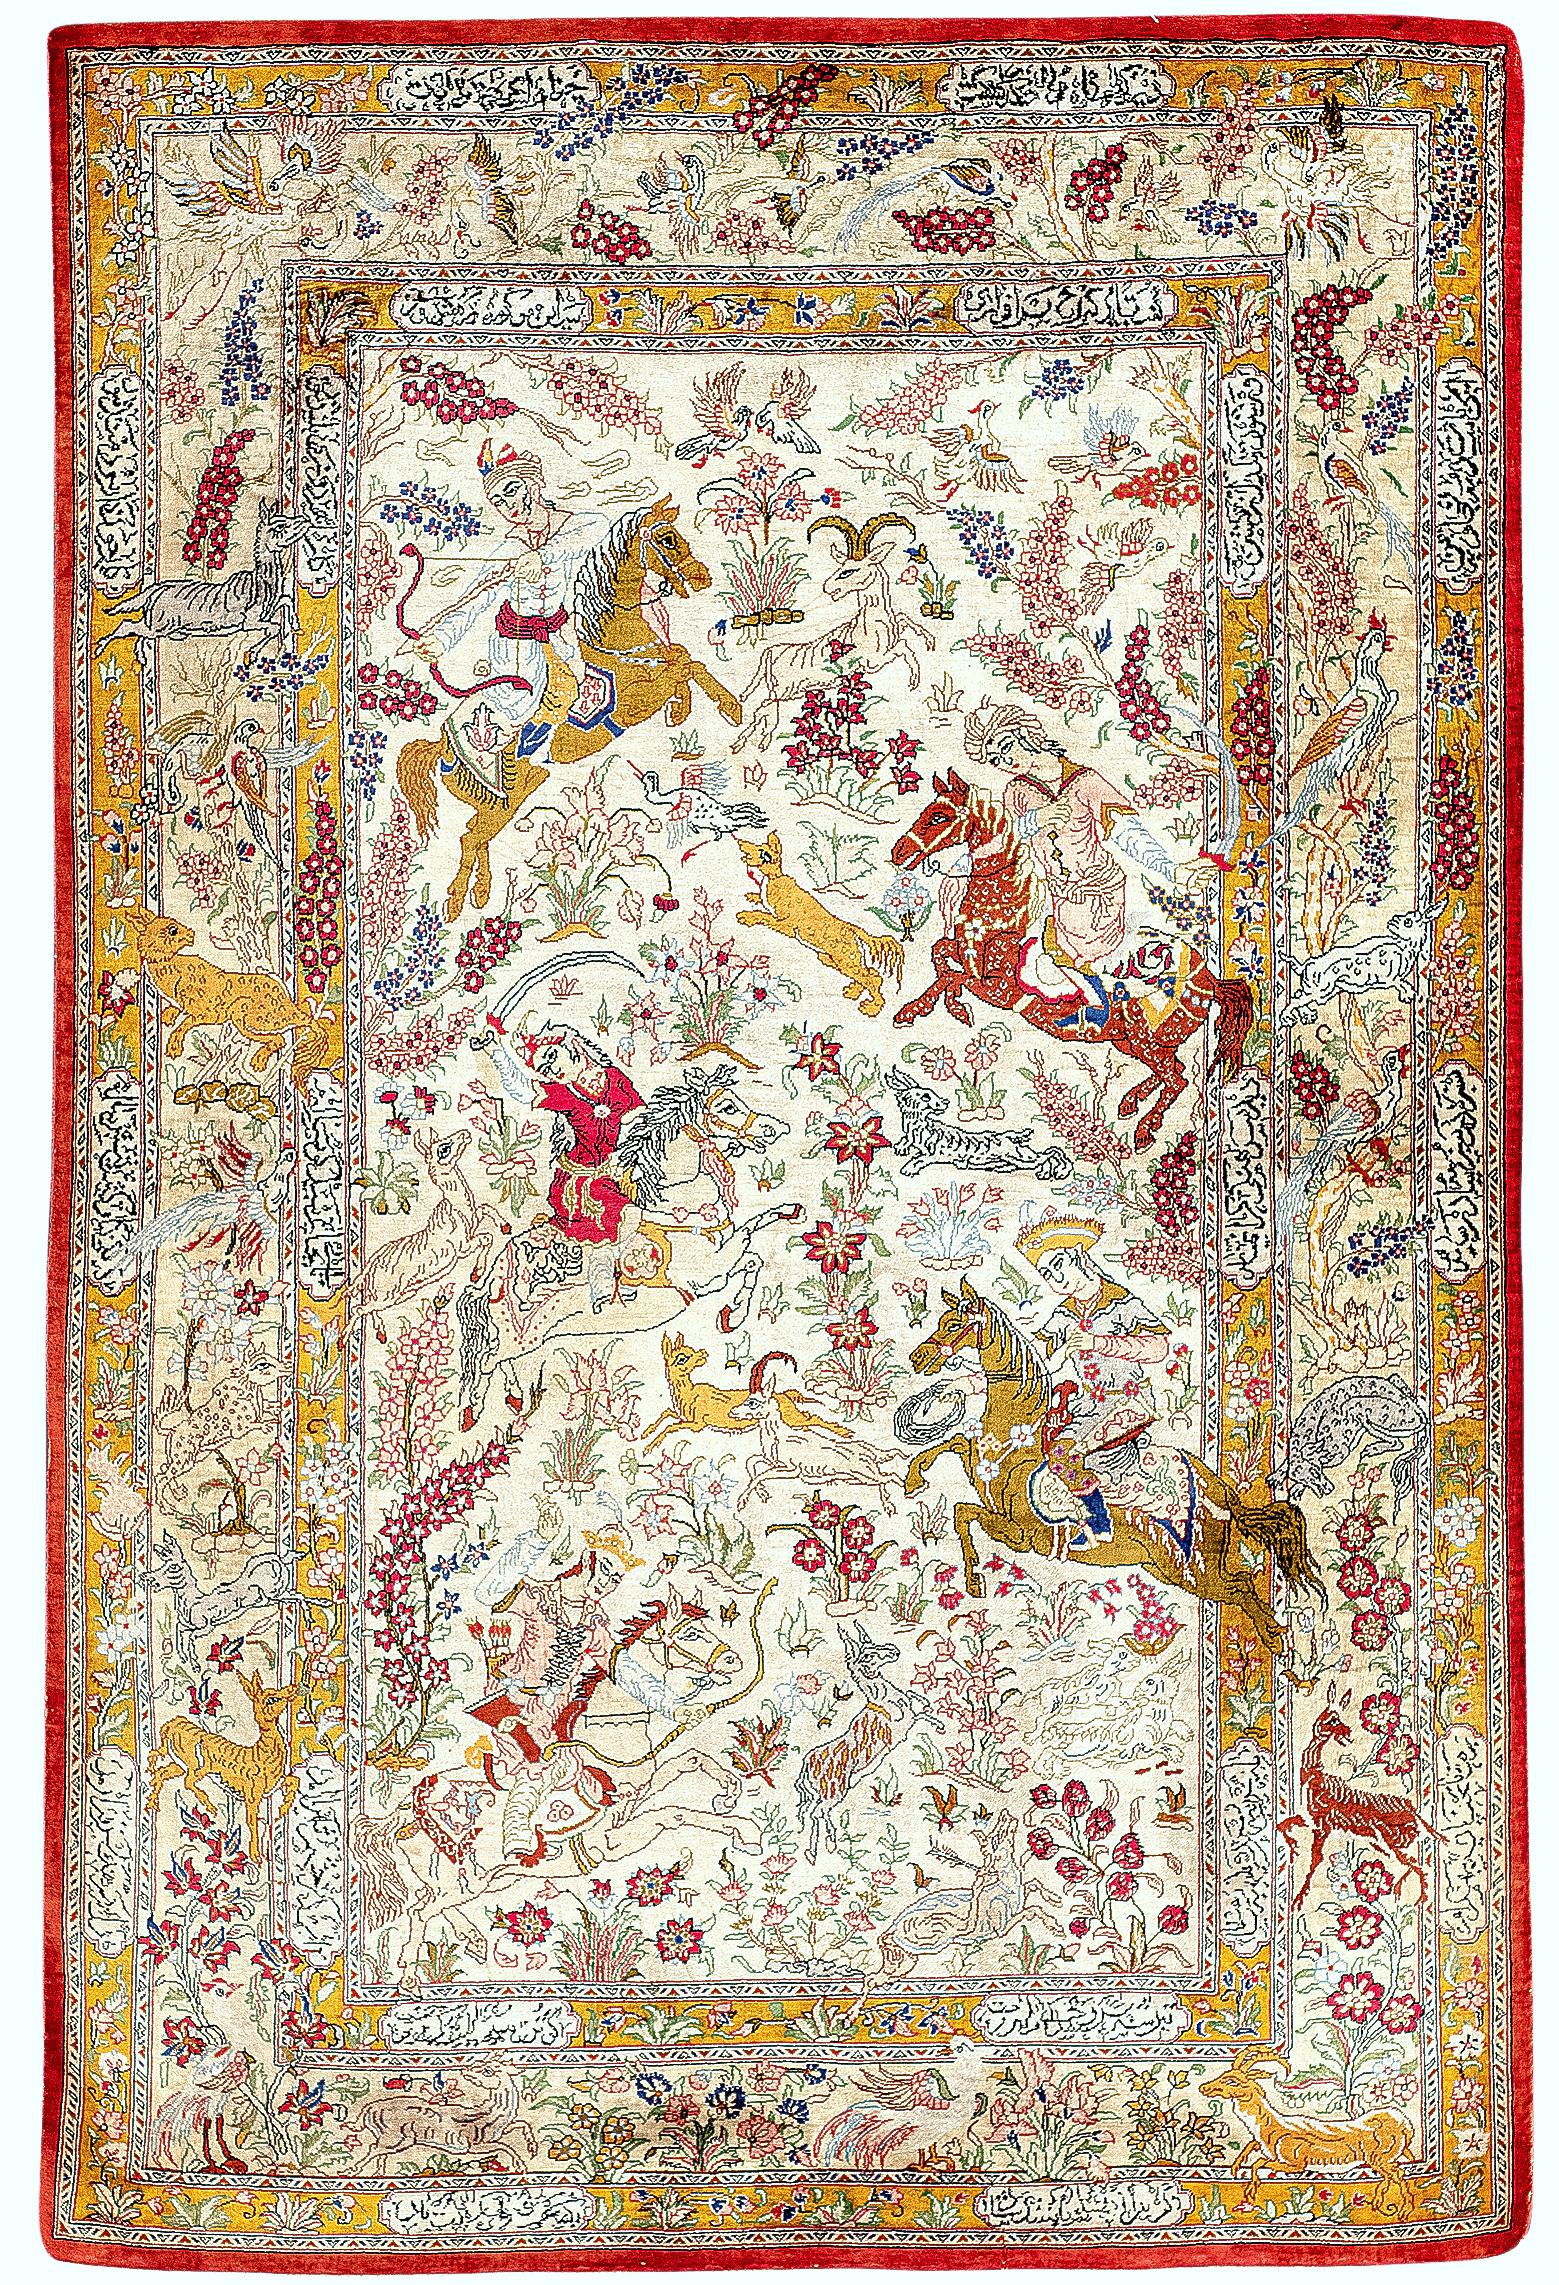 Ghom Silk– Northwest Persia

Splendid silk rug with hunting motifs with an exceptional level of artistic ability. Hunting-themed rugs are preferred for their rich detailing. This Ghom depicts rulers of Persia successfully hunting their prey. There